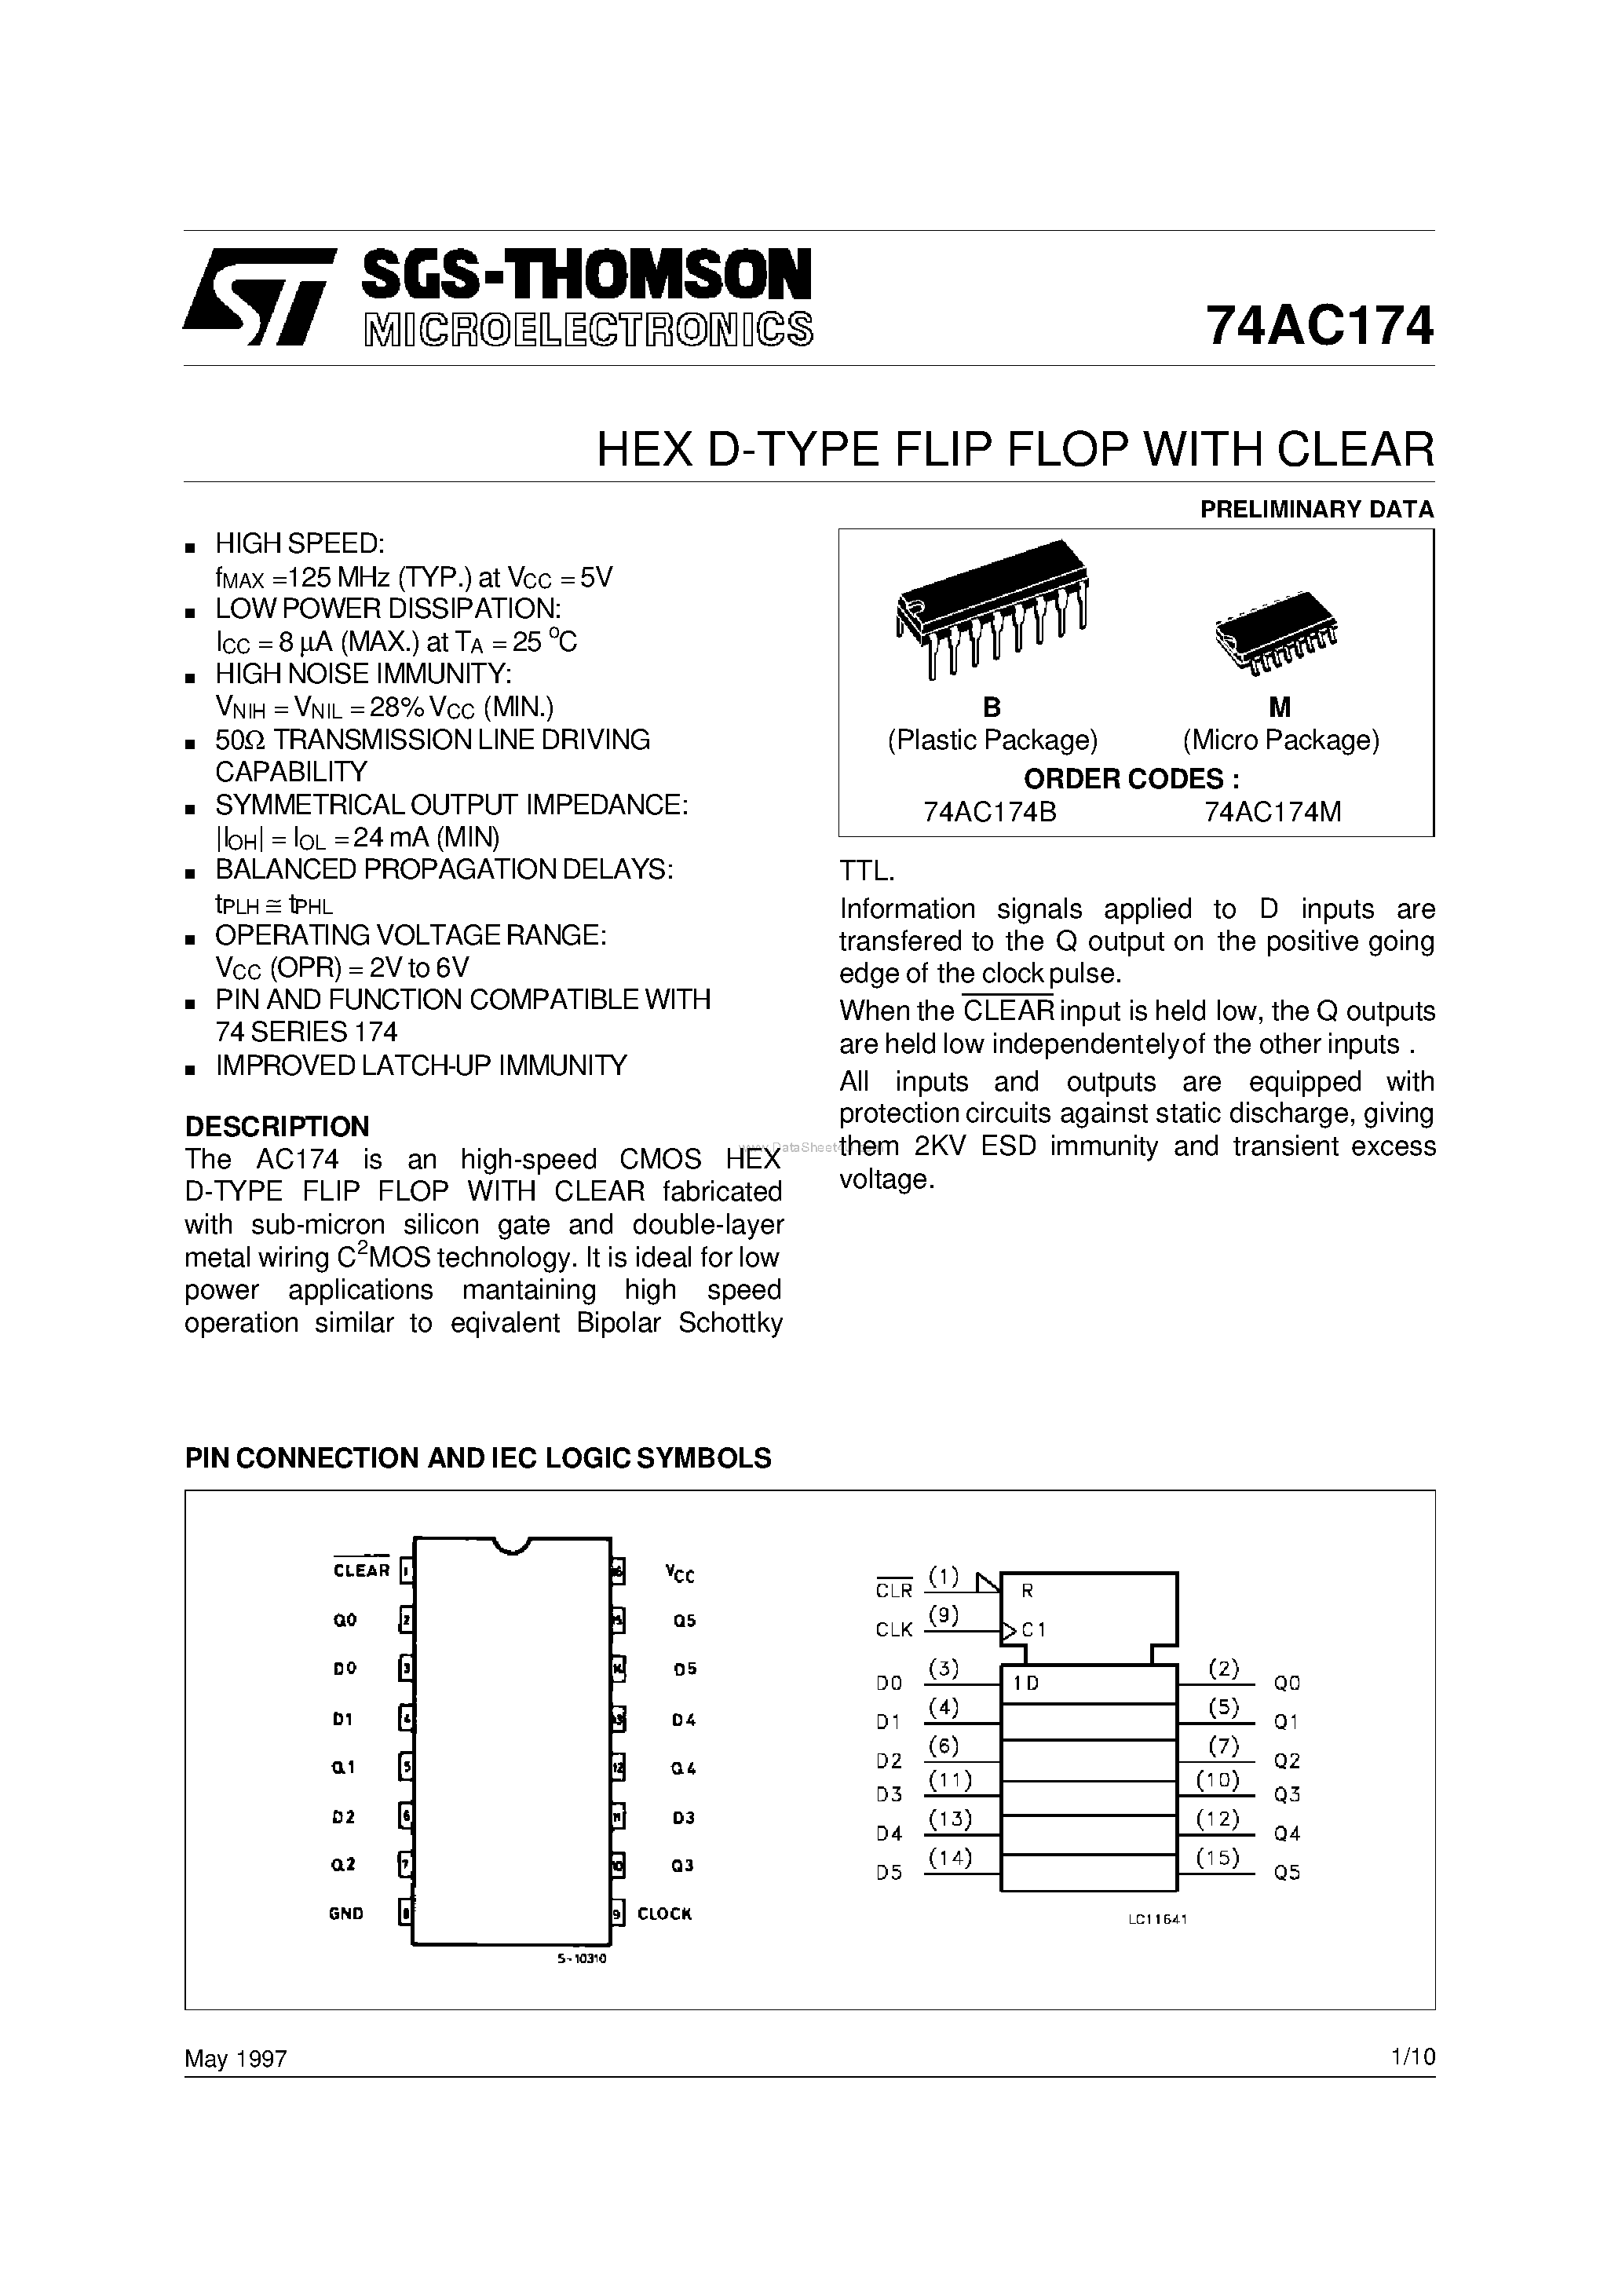 Datasheet 74AC174M - HEX D-TYPE FLIP FLOP WITH CLEAR page 1